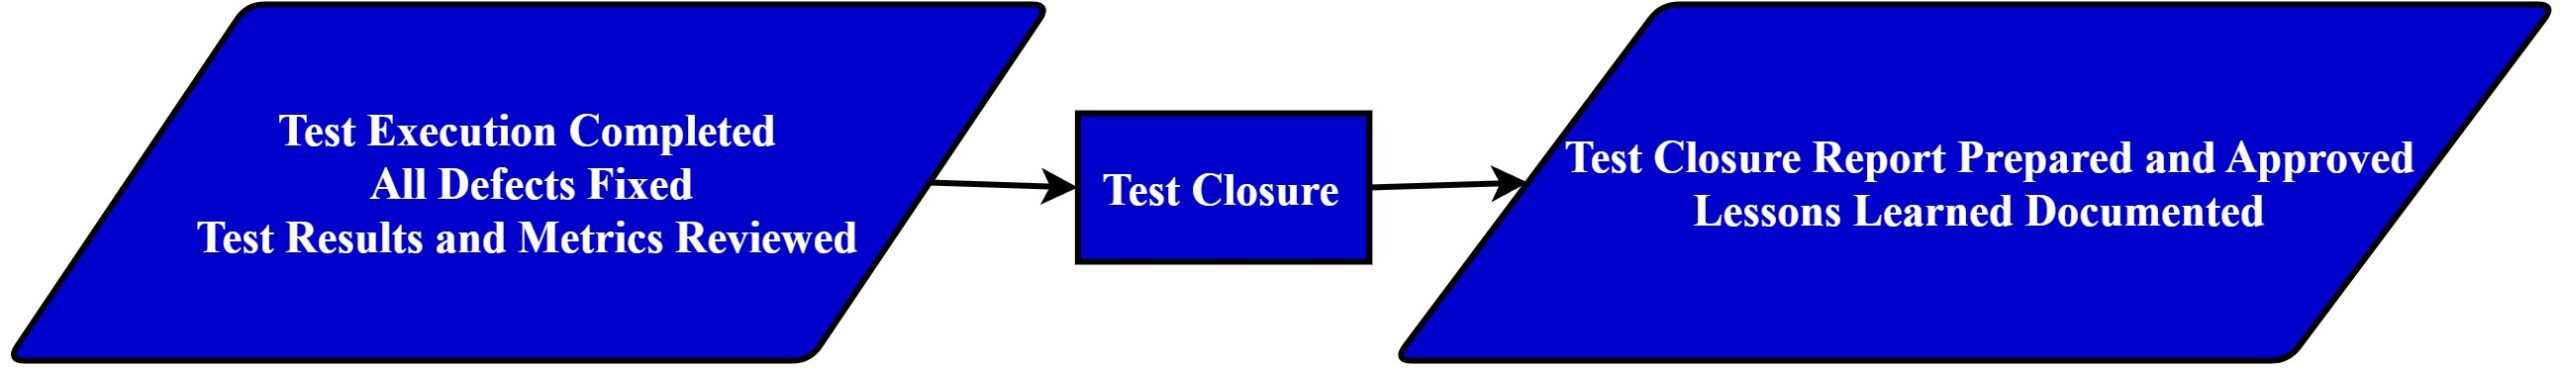 Entry and exit criteria for Test Closure Phase